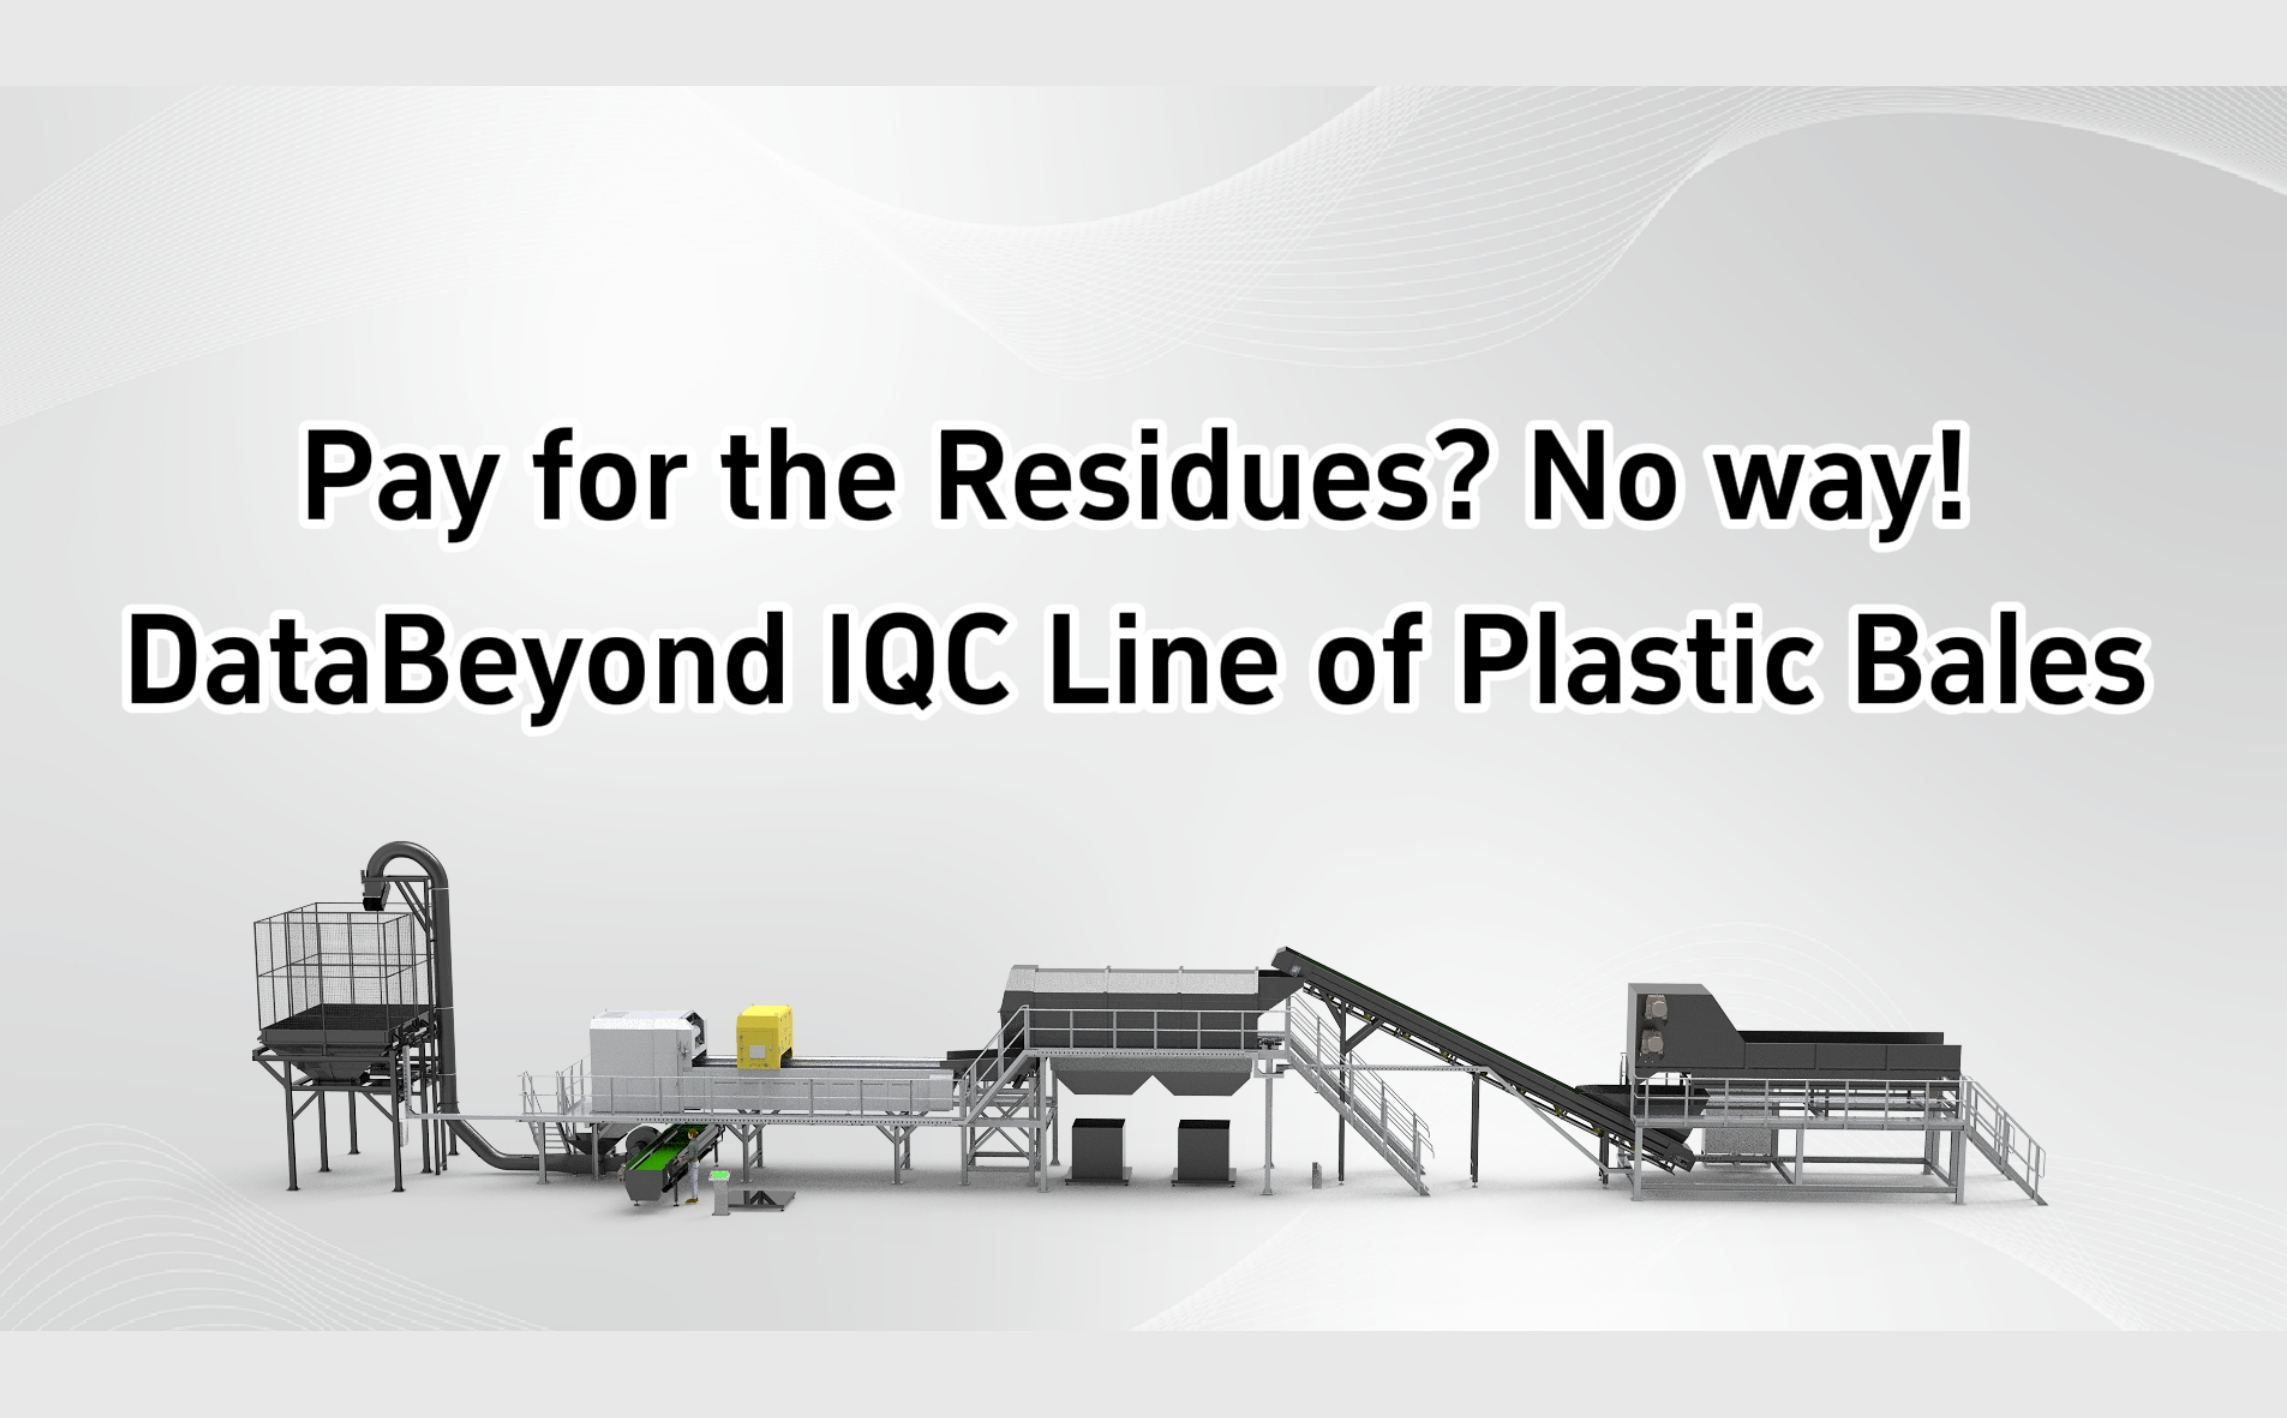 Pay for the Residues? No way! DataBeyond IQC Line of Plastic Bales